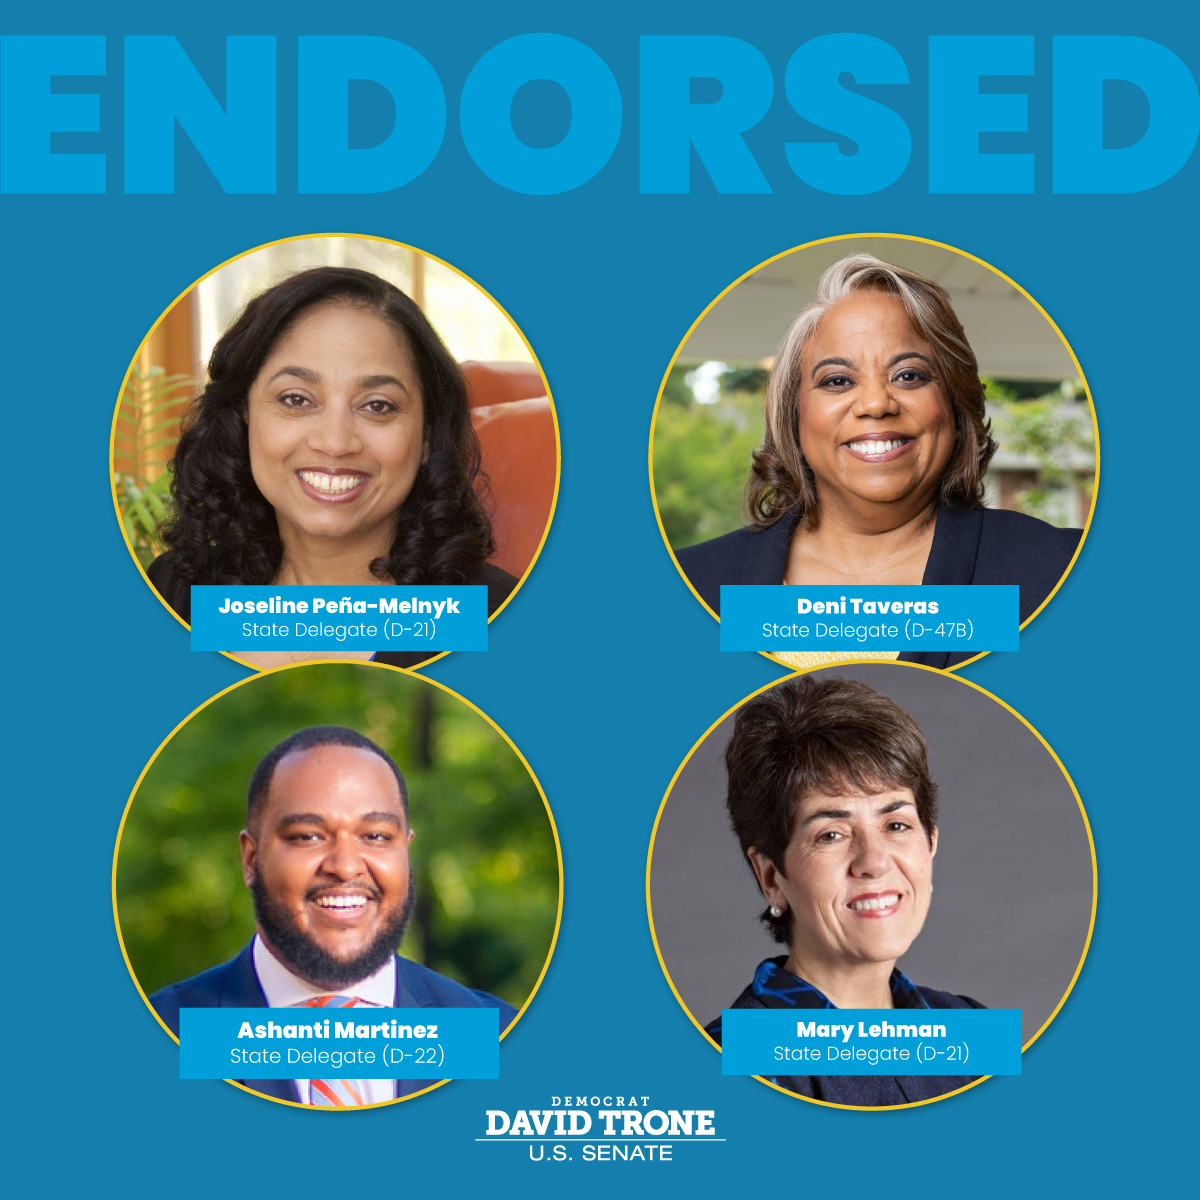 ICYMI: Leaders across Prince George's County are on Team Trone, and I couldn't be more grateful. I’m honored to have the endorsement of Delegates @JPenaMelnyk, @PGCMDeniTaveras, @MartinezforMD, and @MaryLehman_D1 in our race for the U.S. Senate.